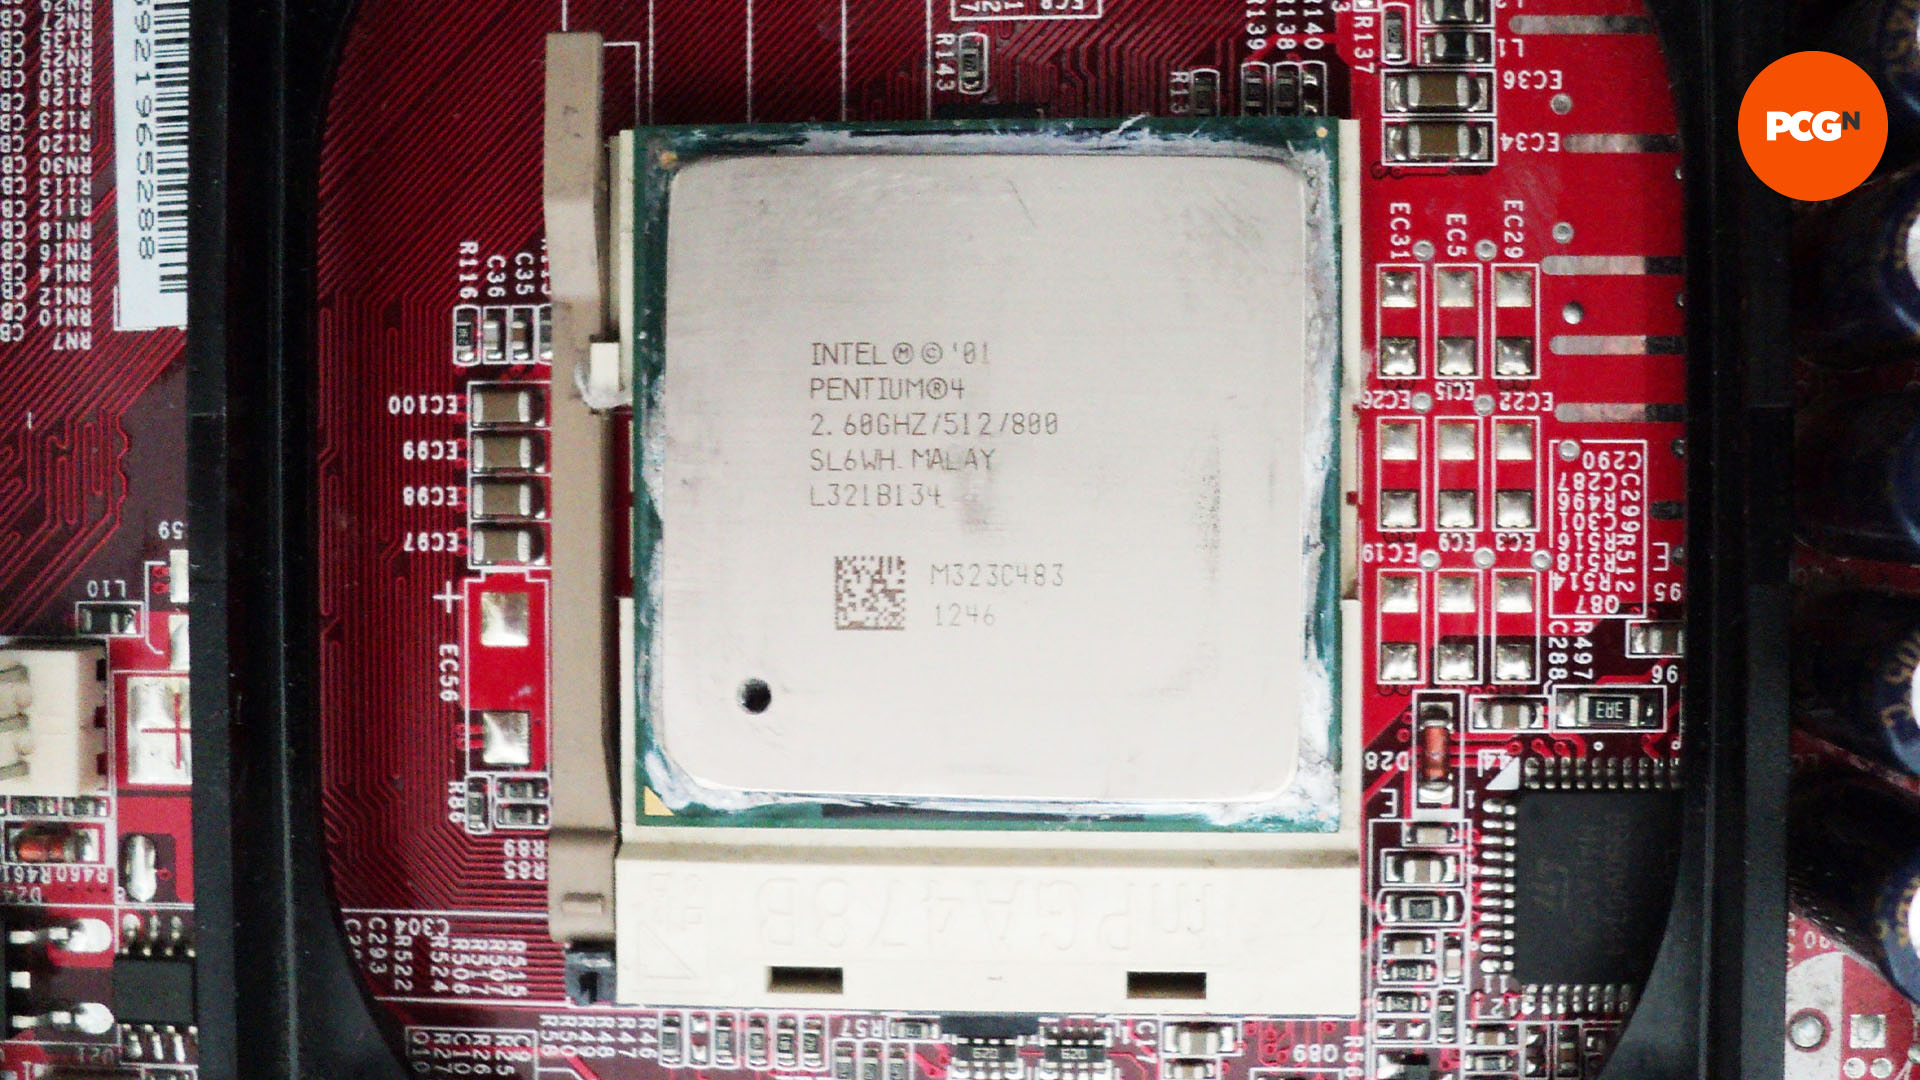 Intel Pentium 4: A 2.6GHz Socket 478 Northbridge CPU installed in a red MSI motherboard